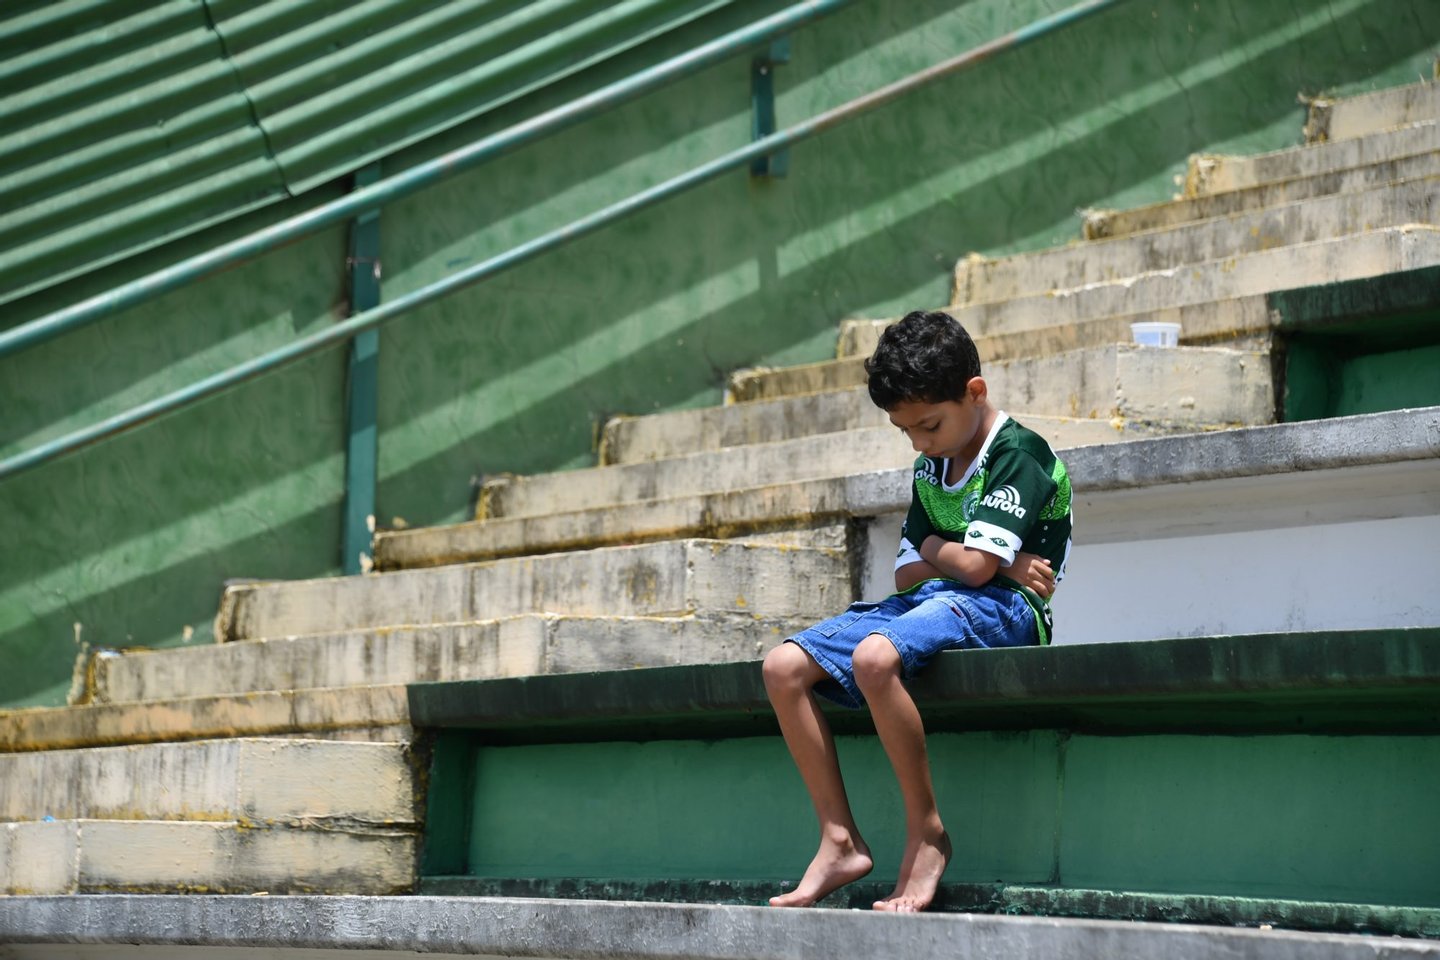 A boy sits alone on the stands during a tribute to the players of Brazilian team Chapecoense Real who were killed in a plane accident in the Colombian mountains, at the club's Arena Conda stadium in Chapeco, in the southern Brazilian state of Santa Catarina, on November 29, 2016. Players of the Chapecoense were among 81 people on board the doomed flight that crashed into mountains in northwestern Colombia, in which officials said just six people were thought to have survived, including three of the players. Chapecoense had risen from obscurity to make it to the Copa Sudamericana finals scheduled for Wednesday against Atletico Nacional of Colombia.  / AFP / Nelson ALMEIDA        (Photo credit should read NELSON ALMEIDA/AFP/Getty Images)